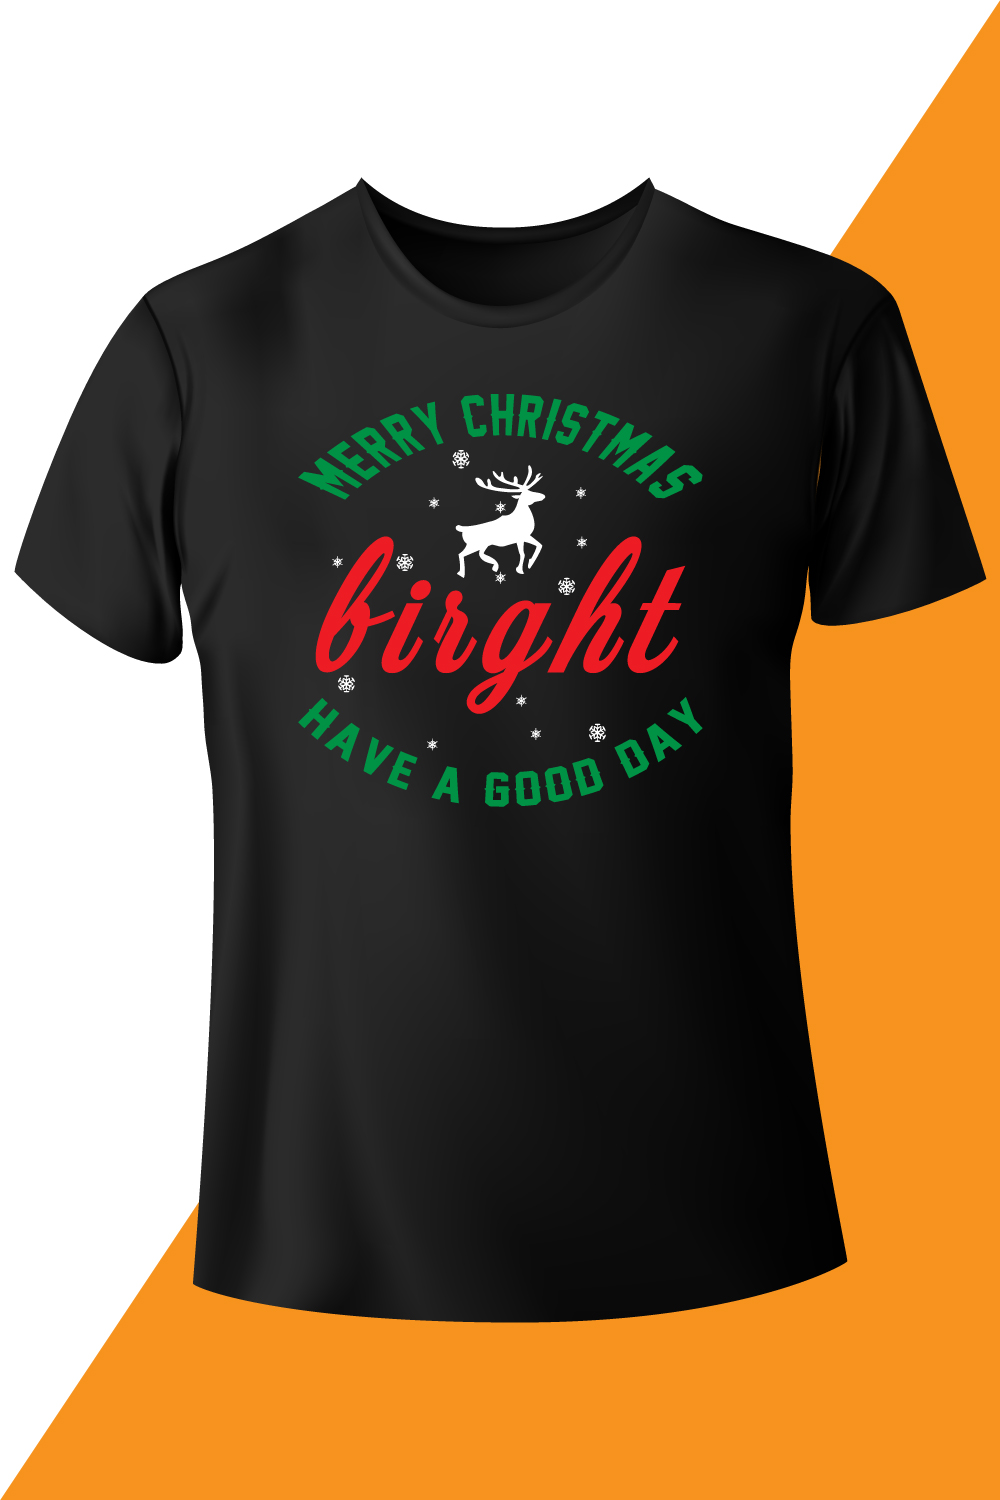 Image of a black t-shirt with a gorgeous print on the theme of Christmas.